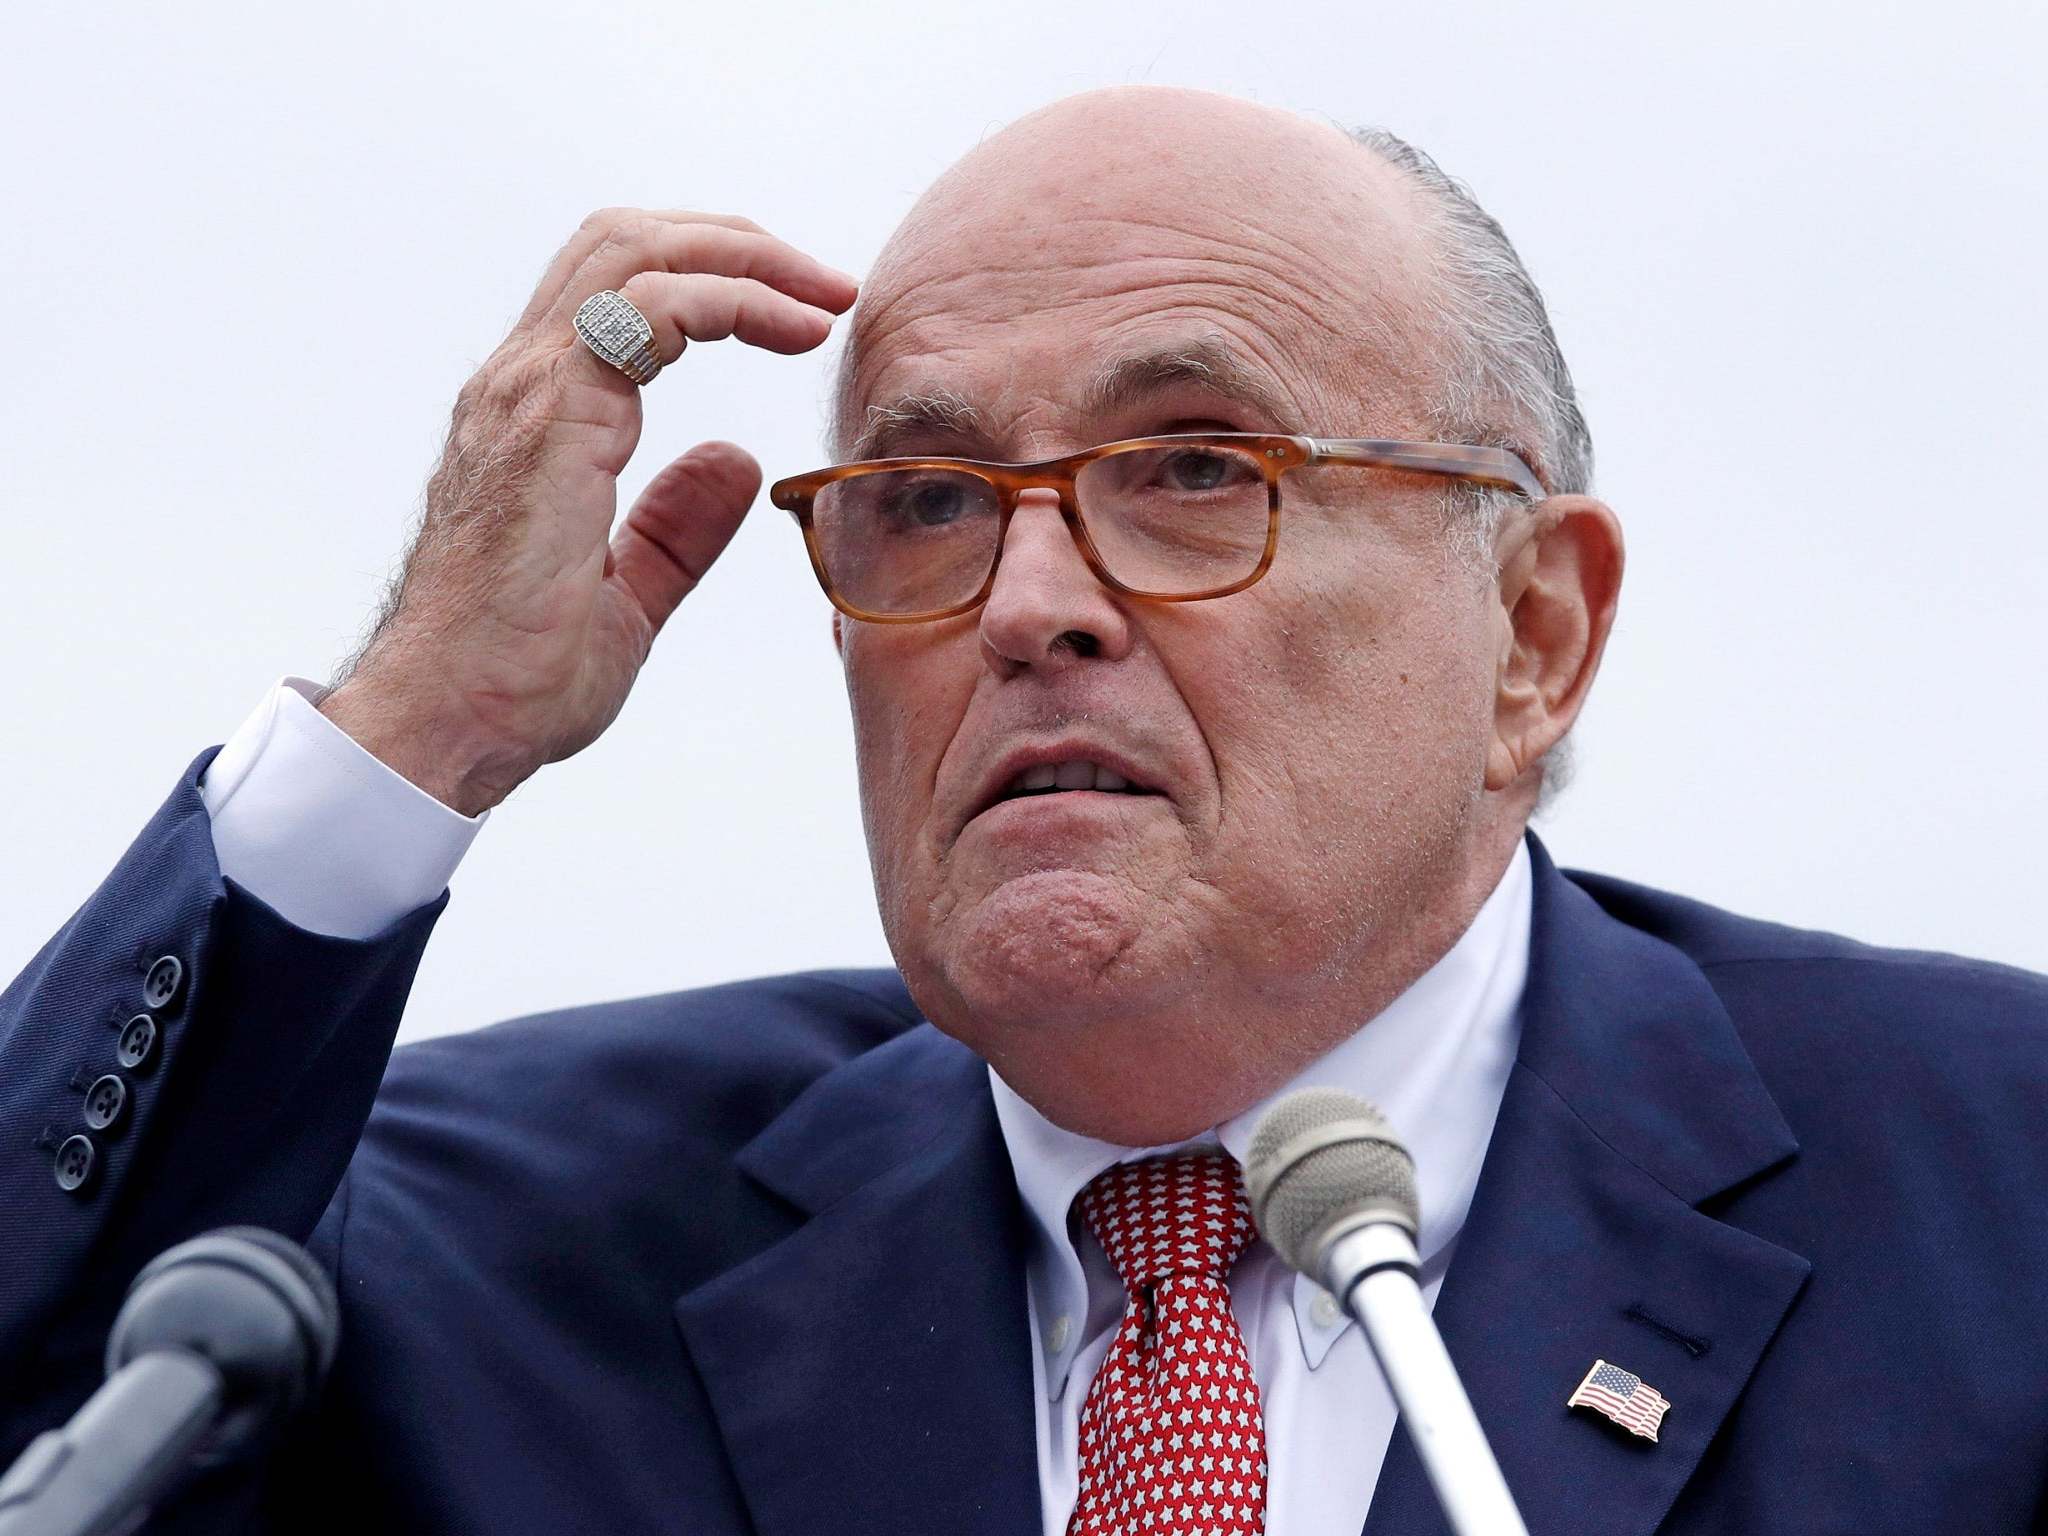 Rudy Giuliani rants about money, Middle East and Bidens in accidental call to reporter